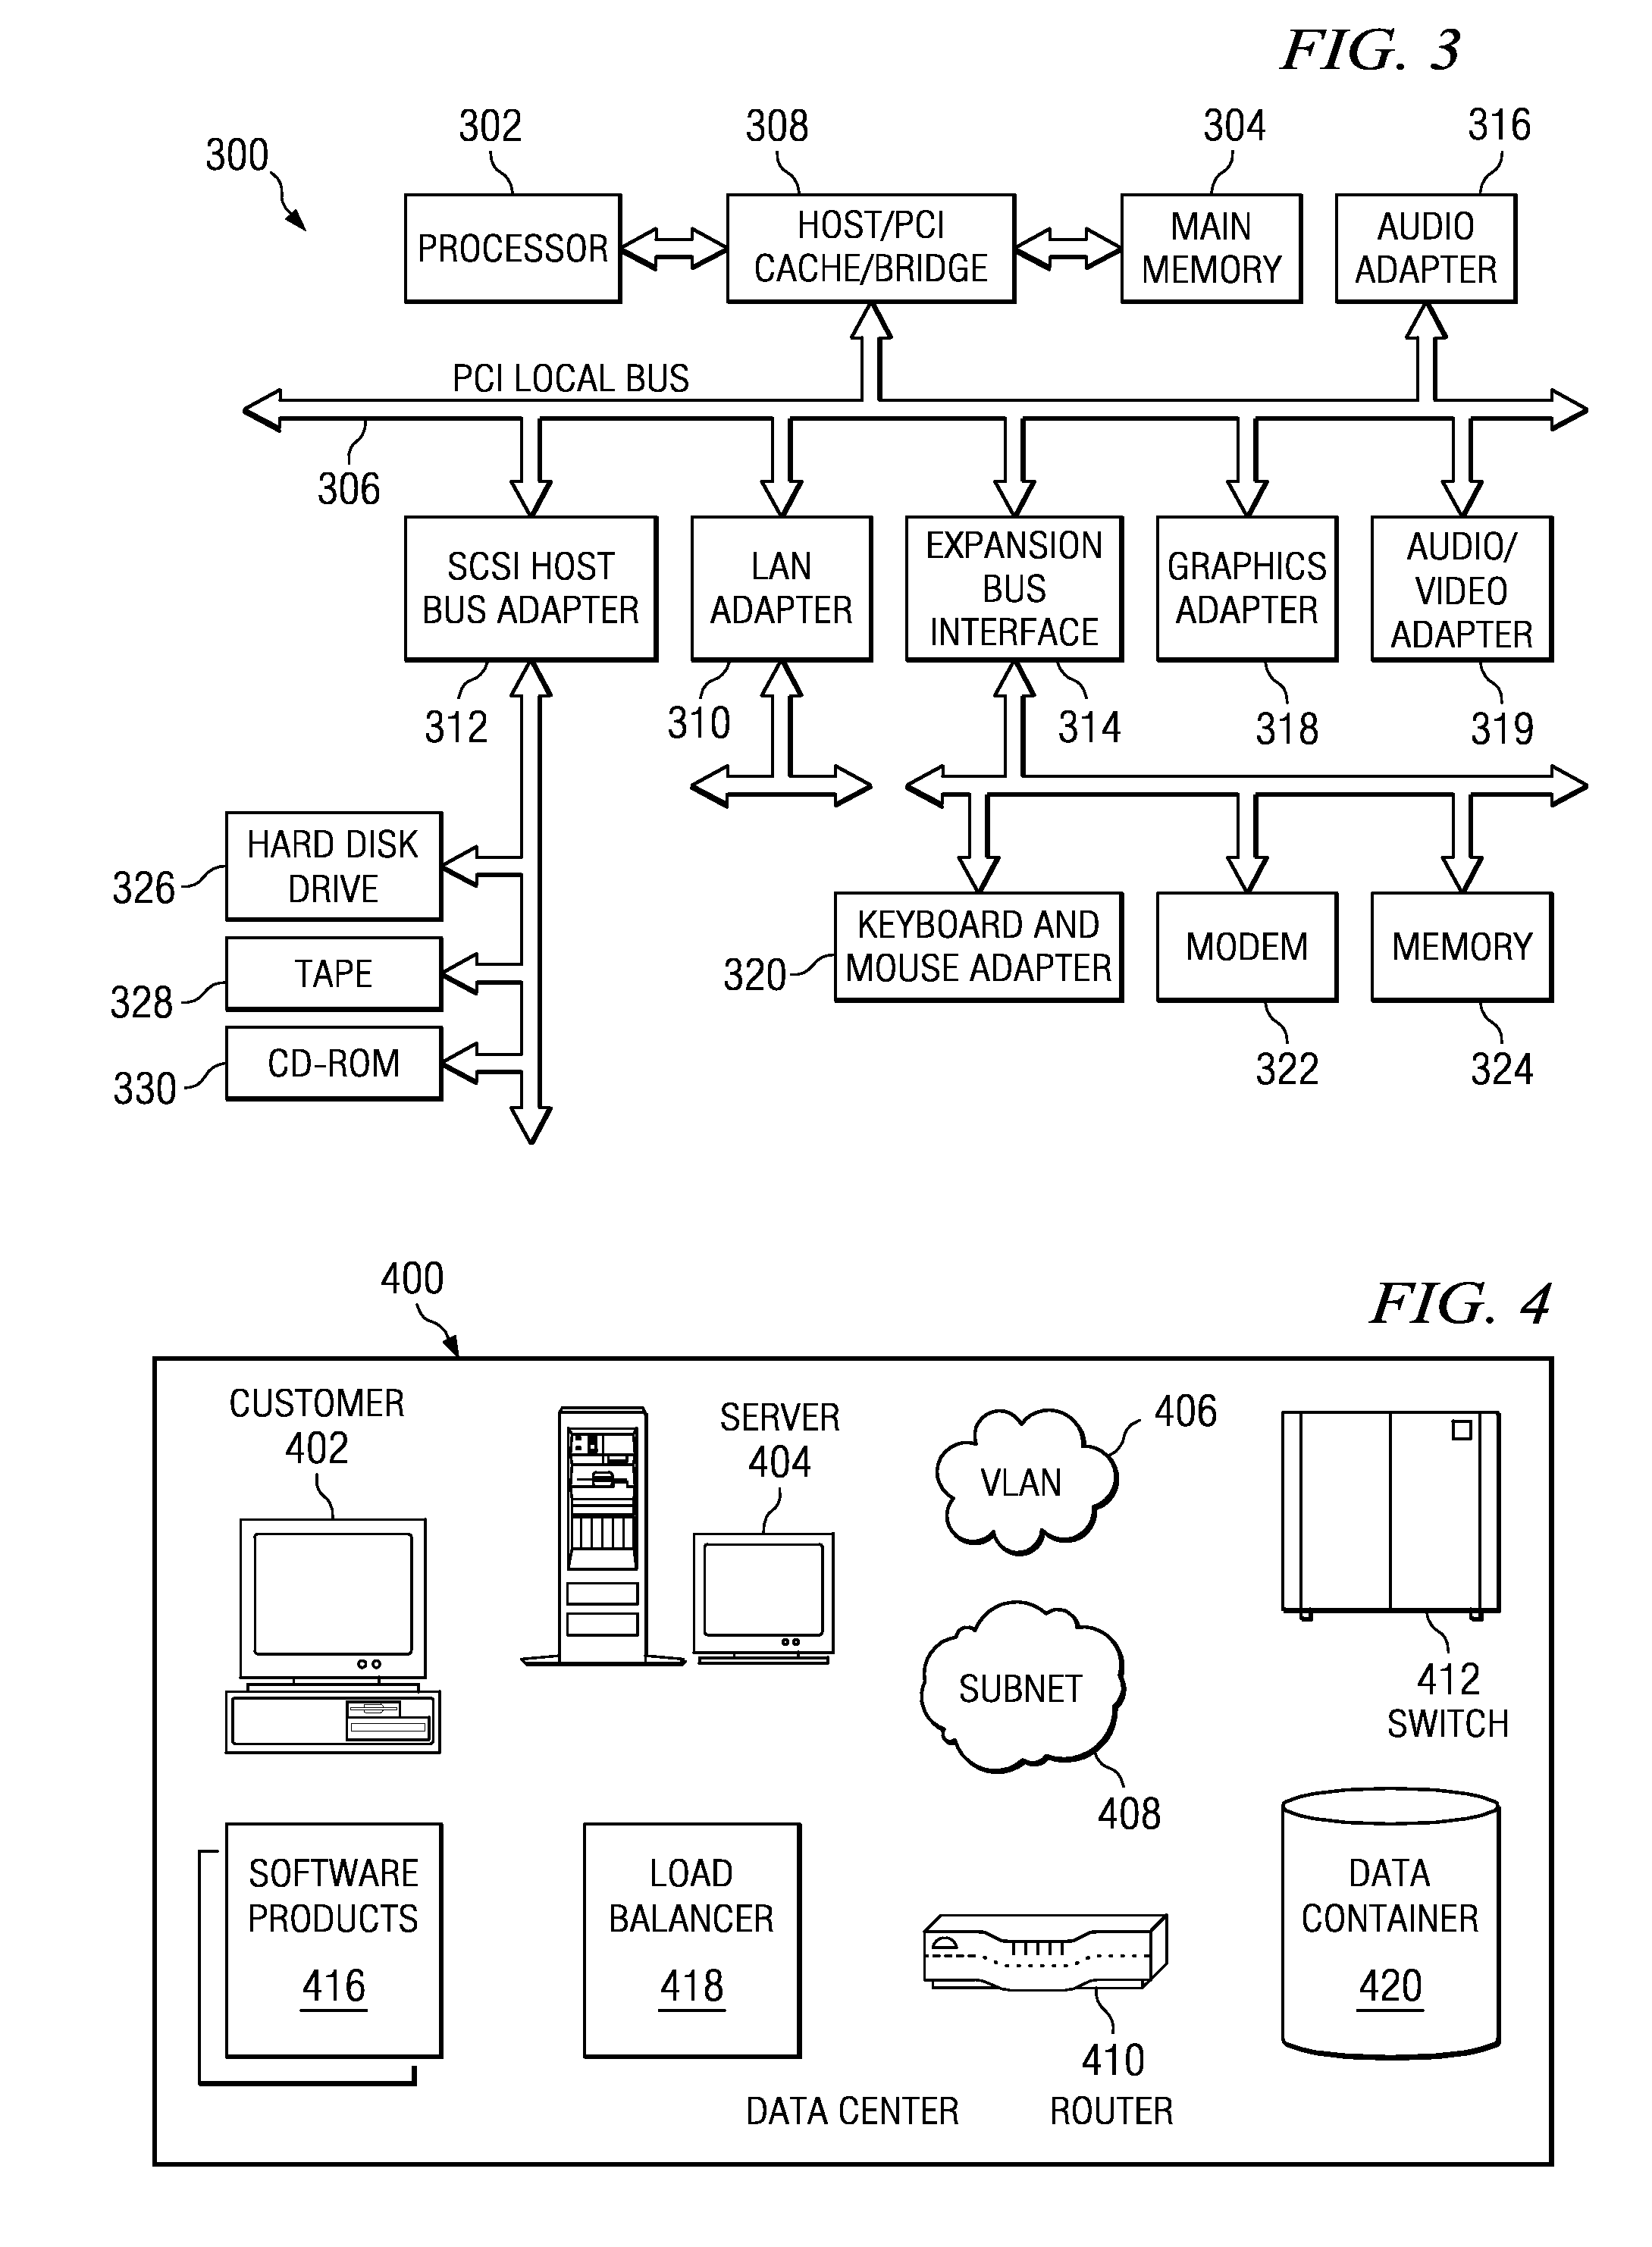 Method and Apparatus for Deploying and Instantiating Multiple Instances of Applications in Automated Data Centers Using Application Deployment Template